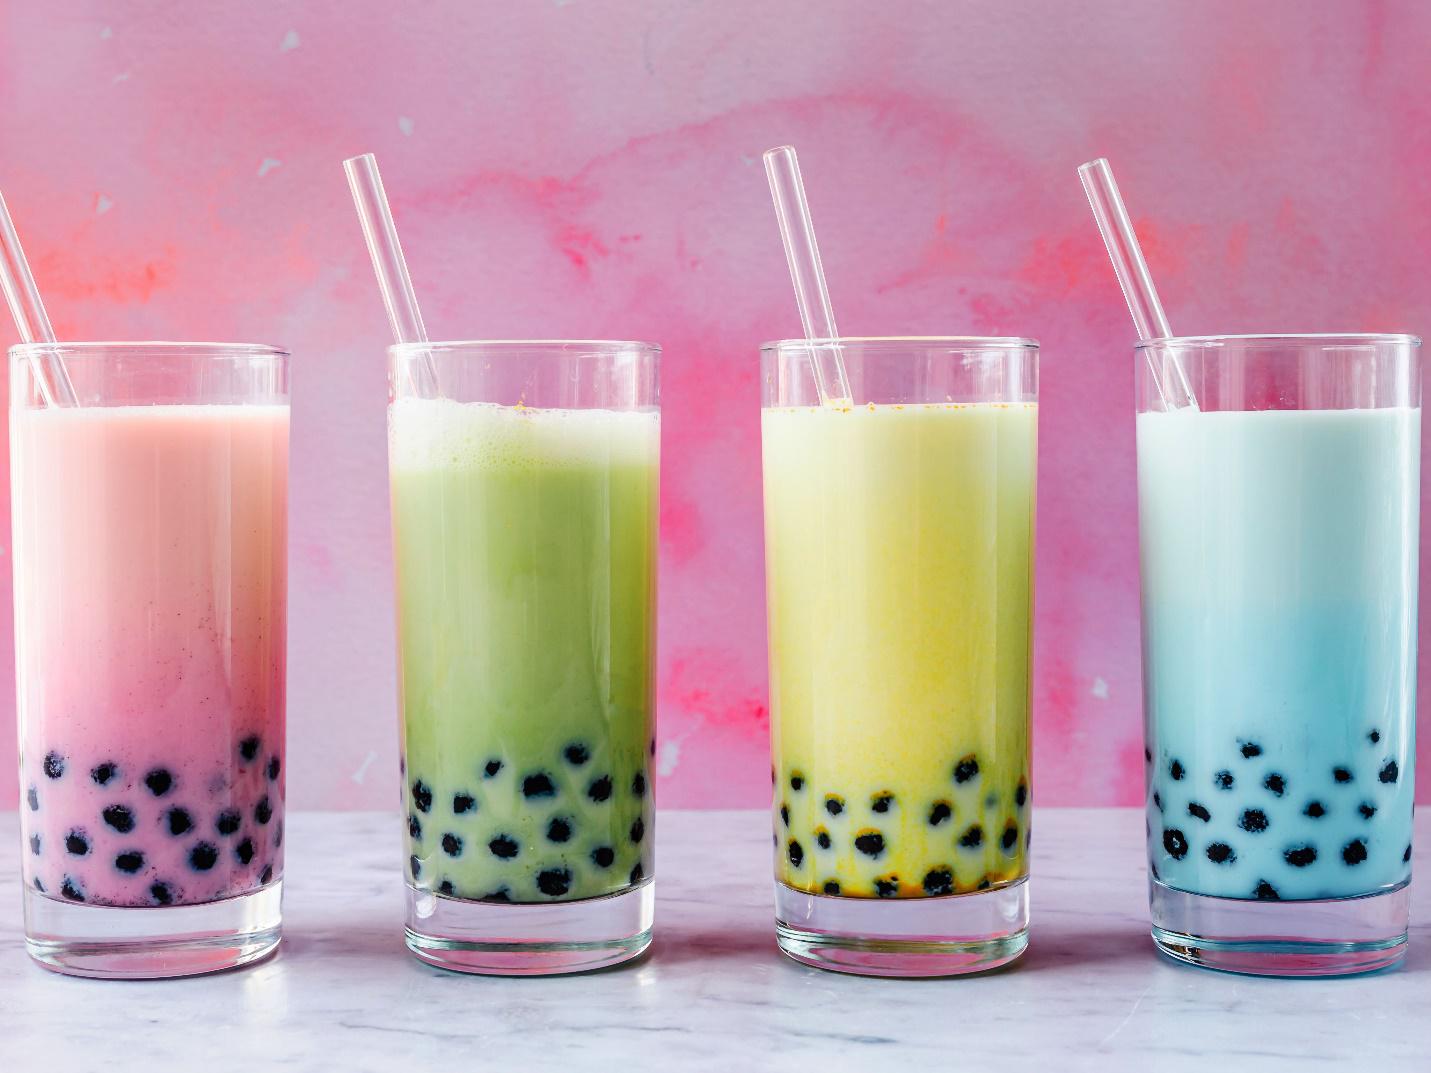 How Bubble/BoBa Drinks Have Taken The World By Storm